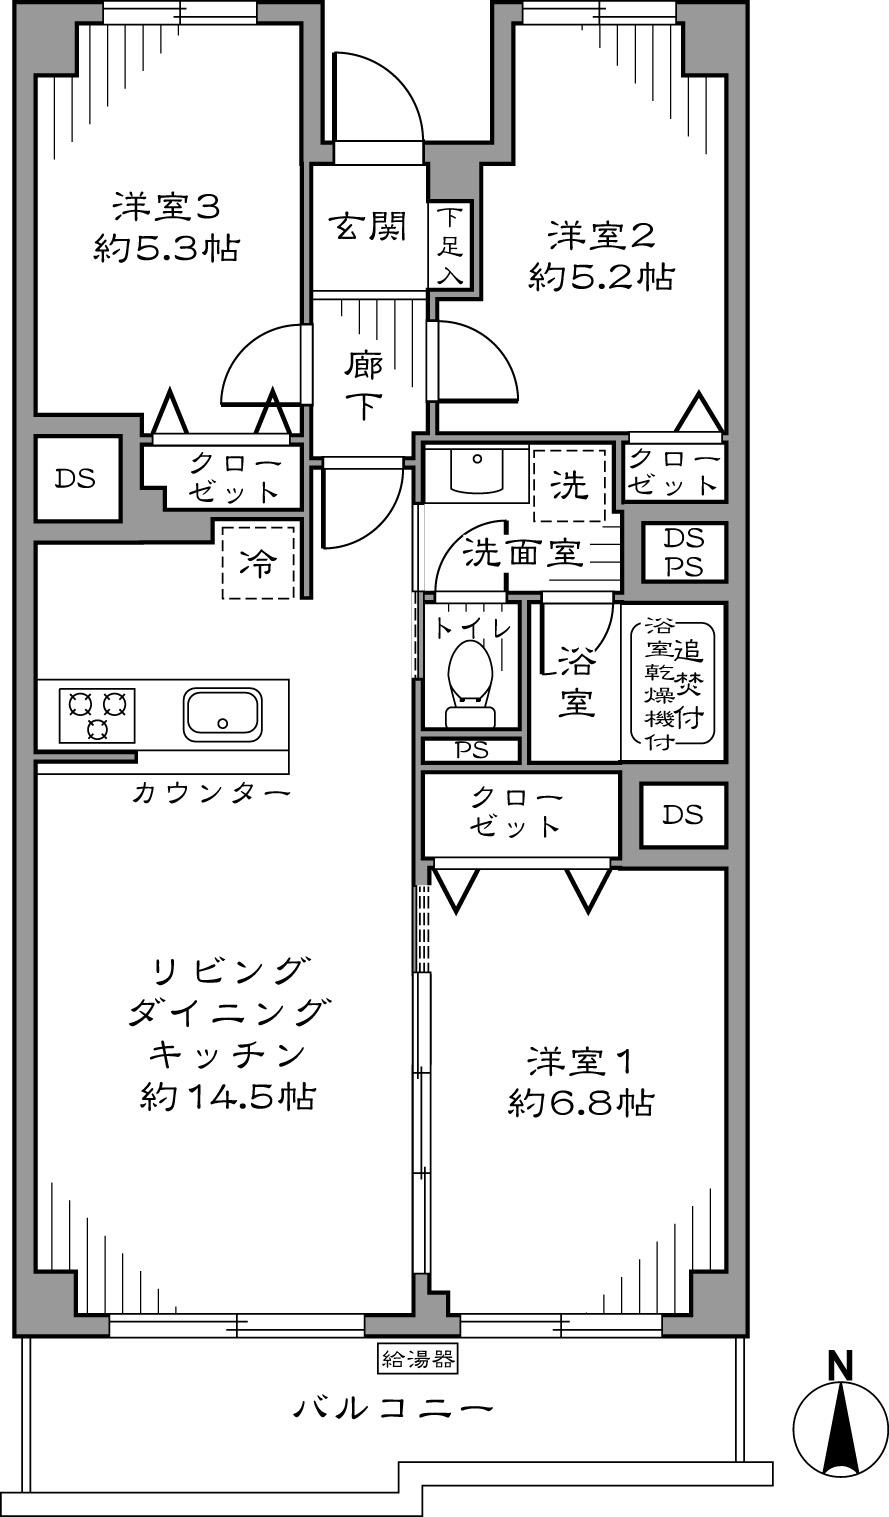 Floor plan. 3LDK, Price 39,800,000 yen, Occupied area 64.95 sq m , Balcony area 8.46 sq m 3LDK 64.95 sq m  There is free parking on site